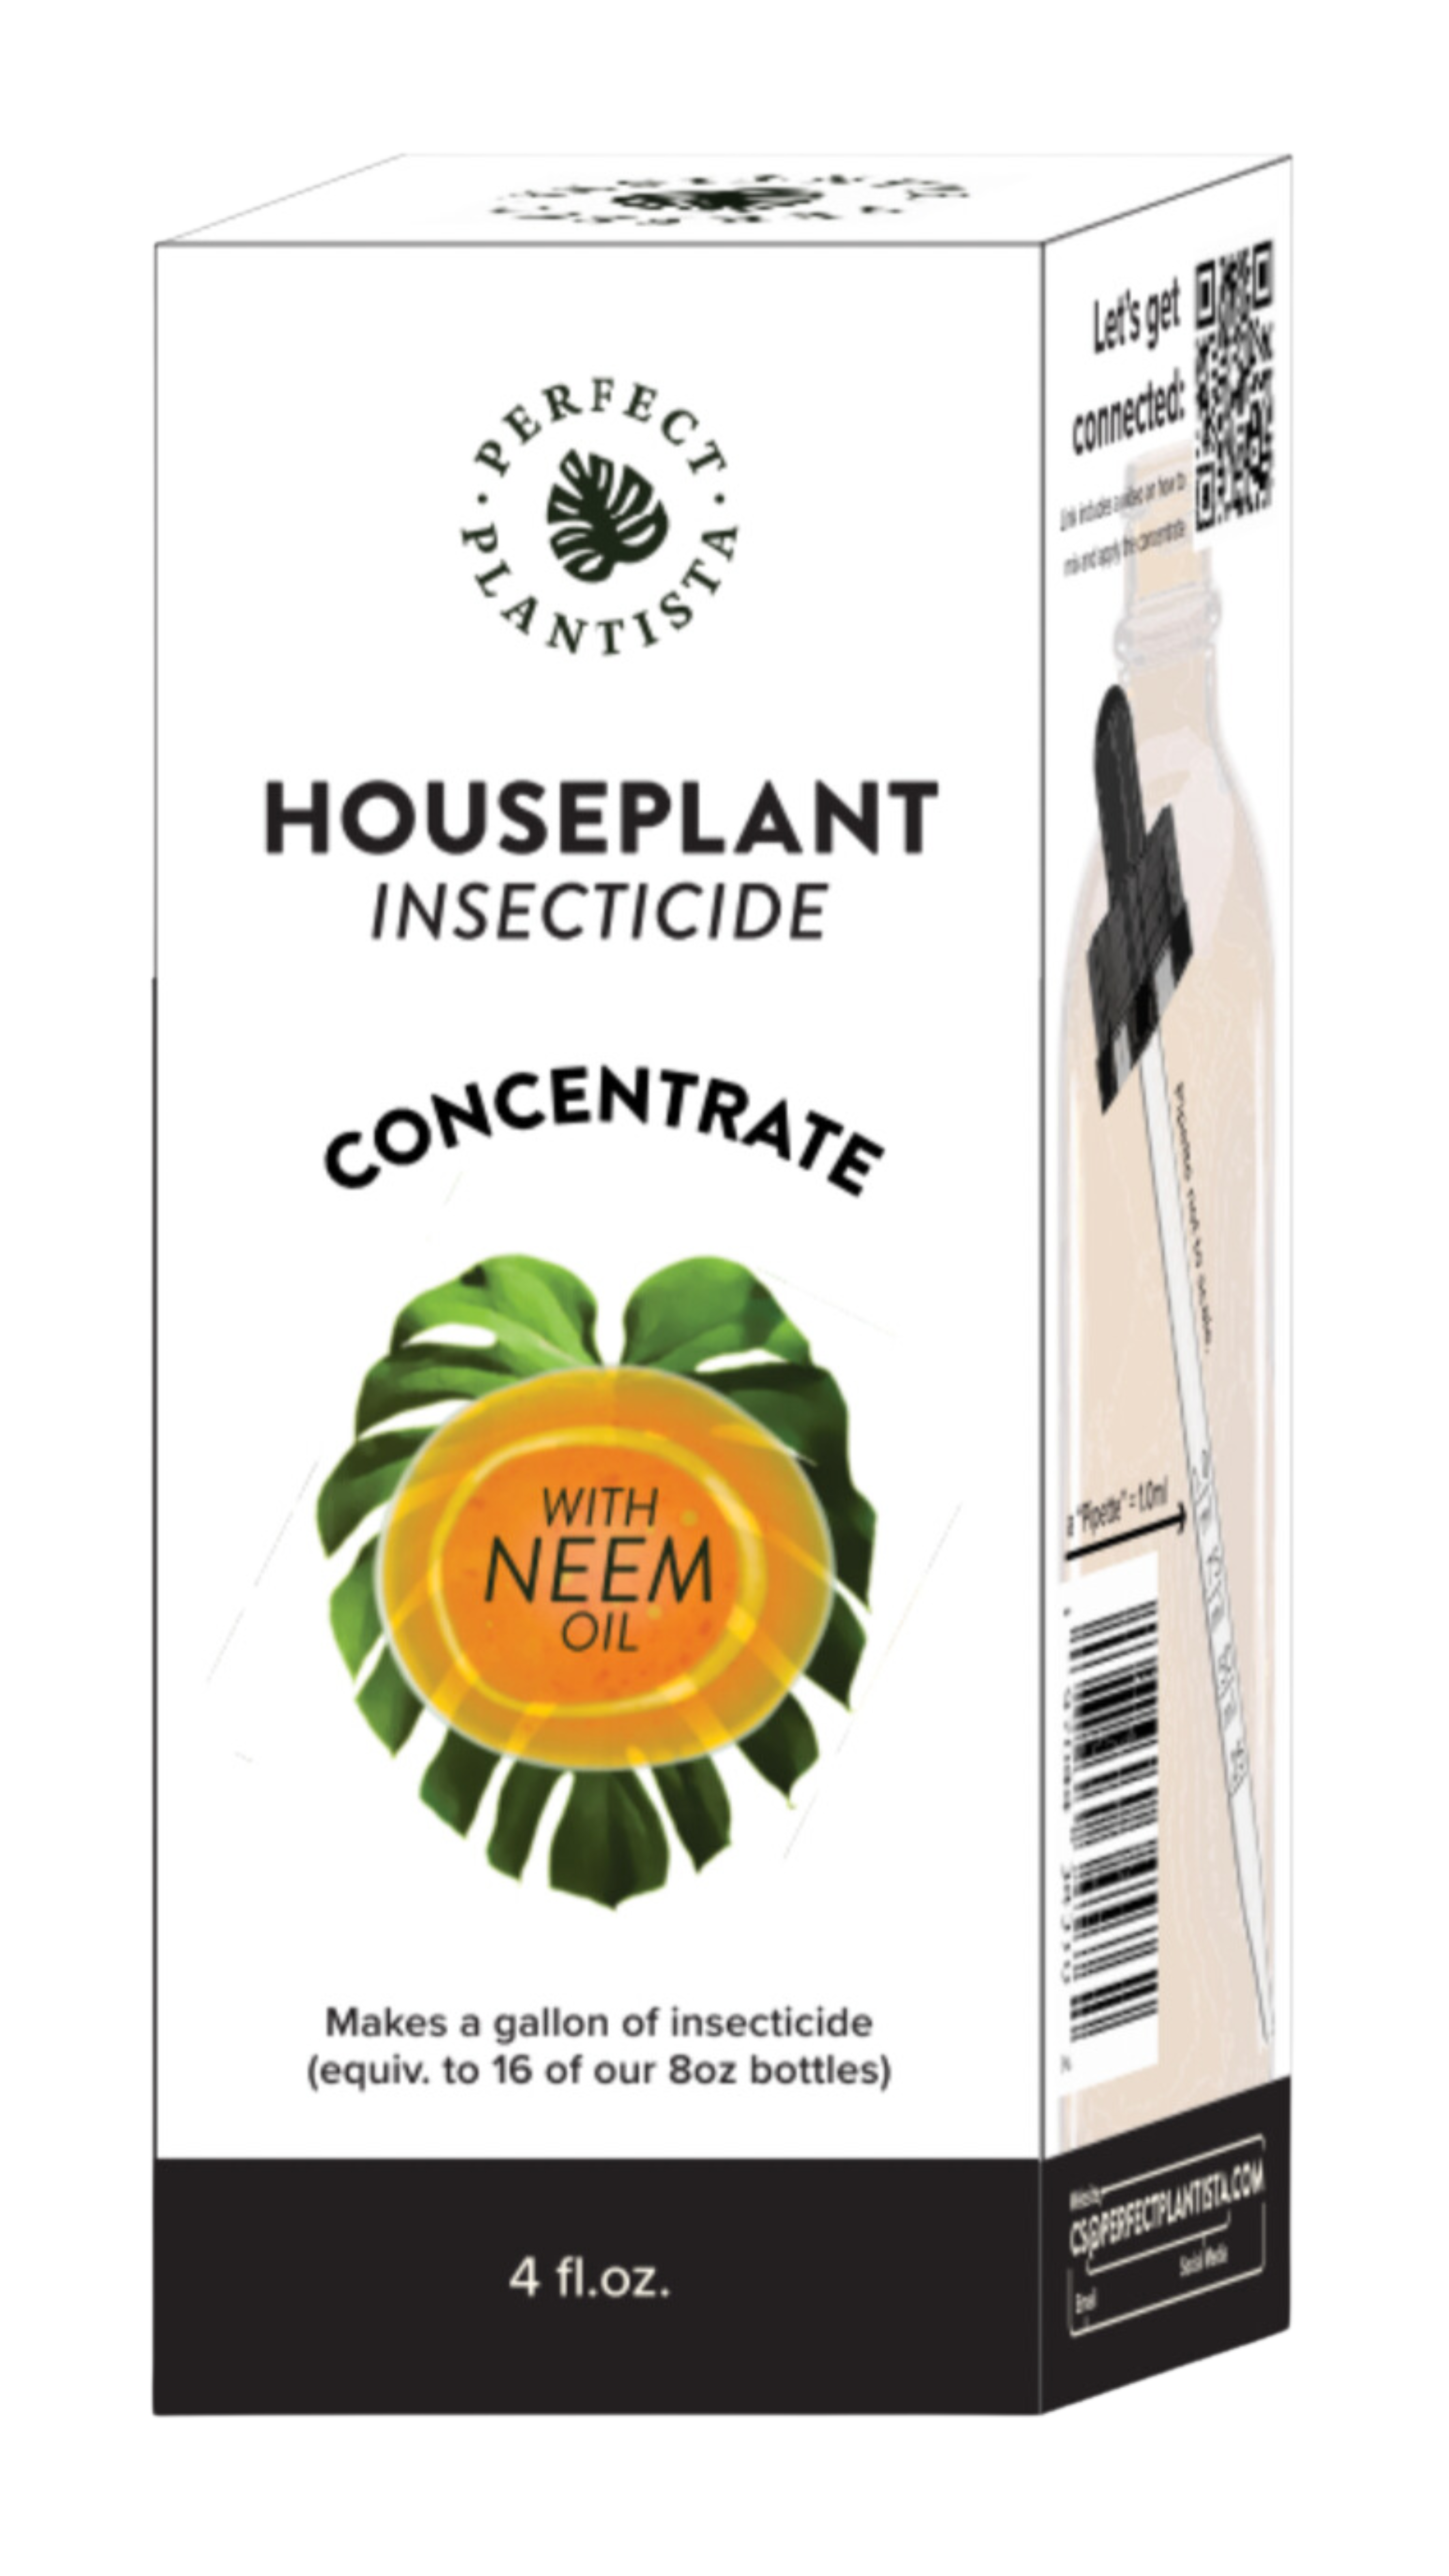 Houseplant Insecticide Concentrate